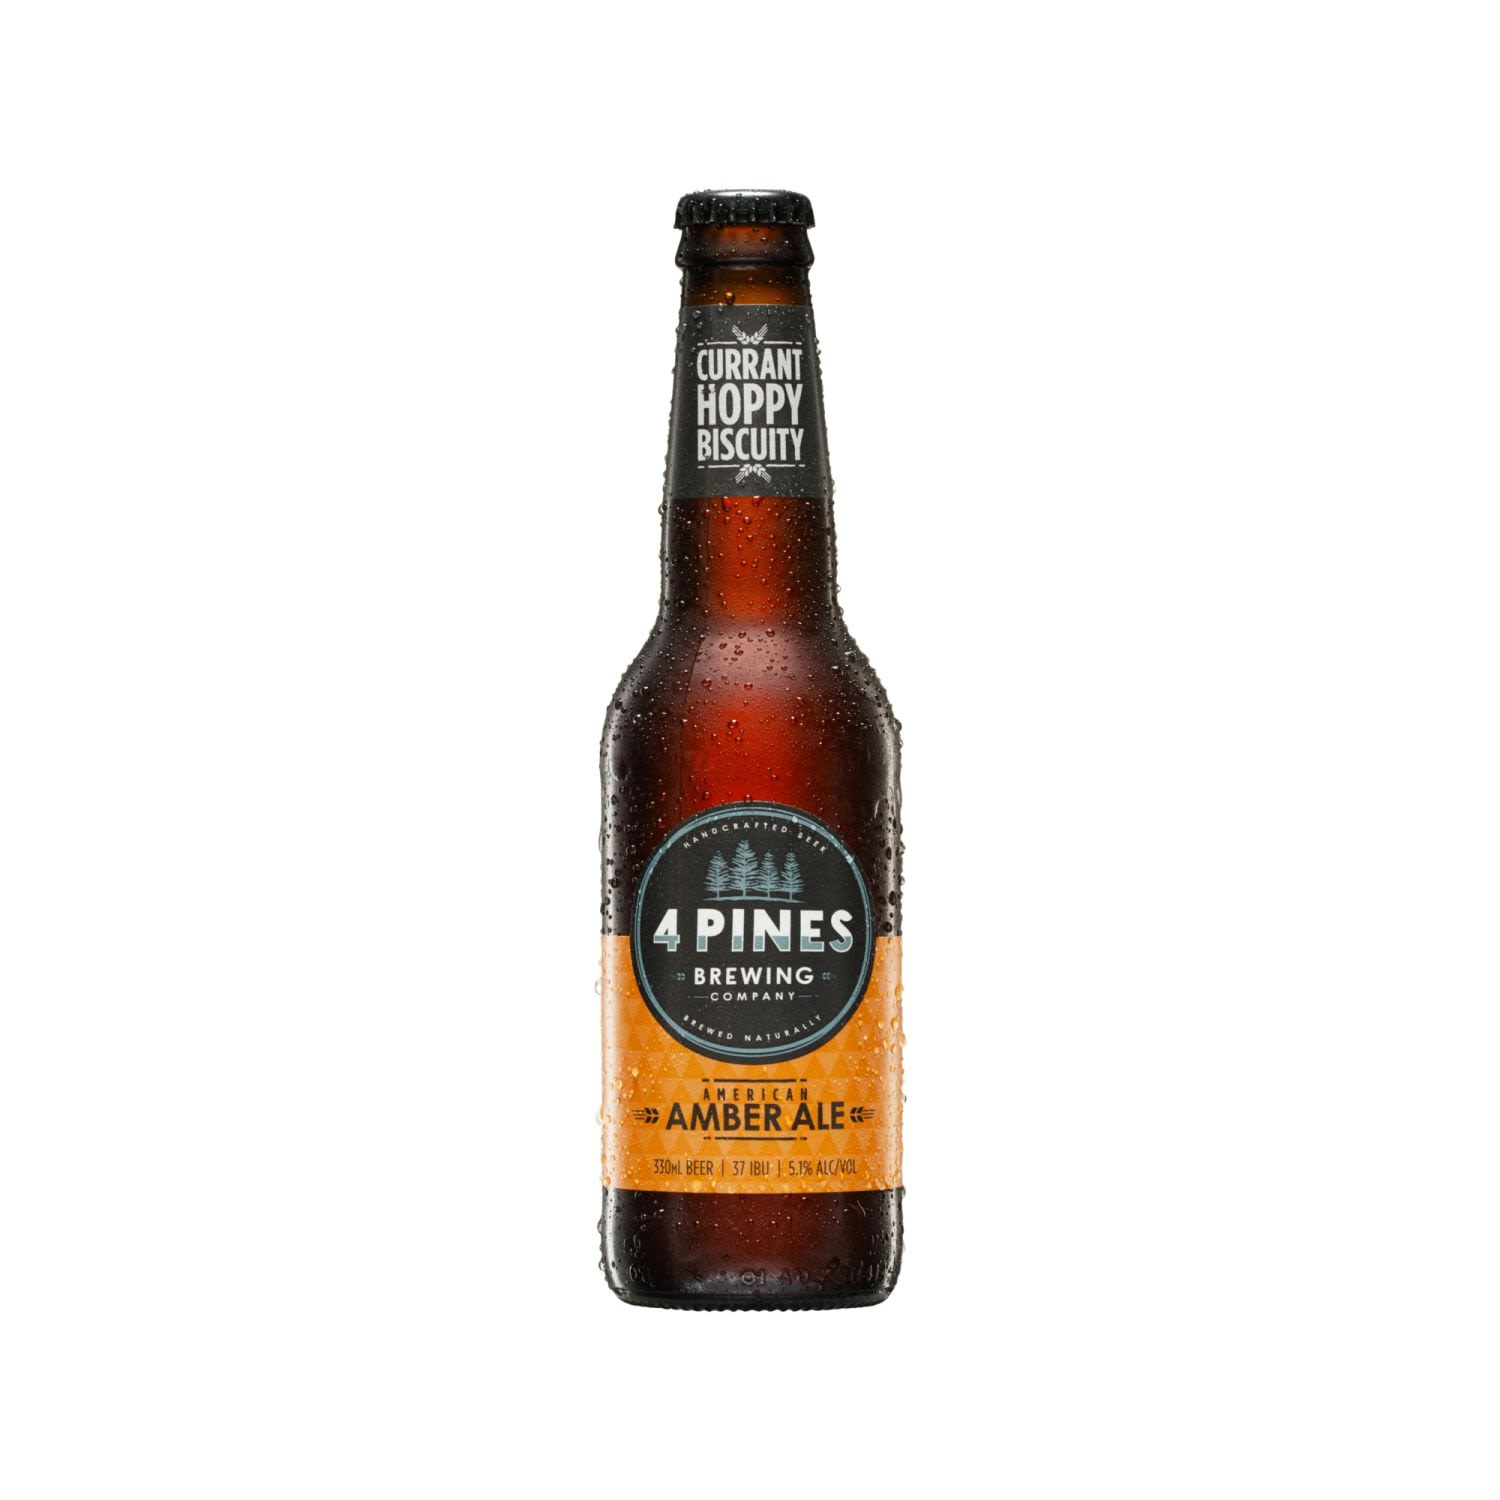 Ruby in colour with rich copper hues. Hop driven aromas of currant and pear are rounded on the palate with a toasted malt character, light fruitiness and a balanced bitter finish.<br /> <br />Alcohol Volume: 5.10%<br /><br />Pack Format: Bottle<br /><br />Standard Drinks: 2.1</br /><br />Pack Type: Bottle<br /><br />Country of Origin: Australia<br />